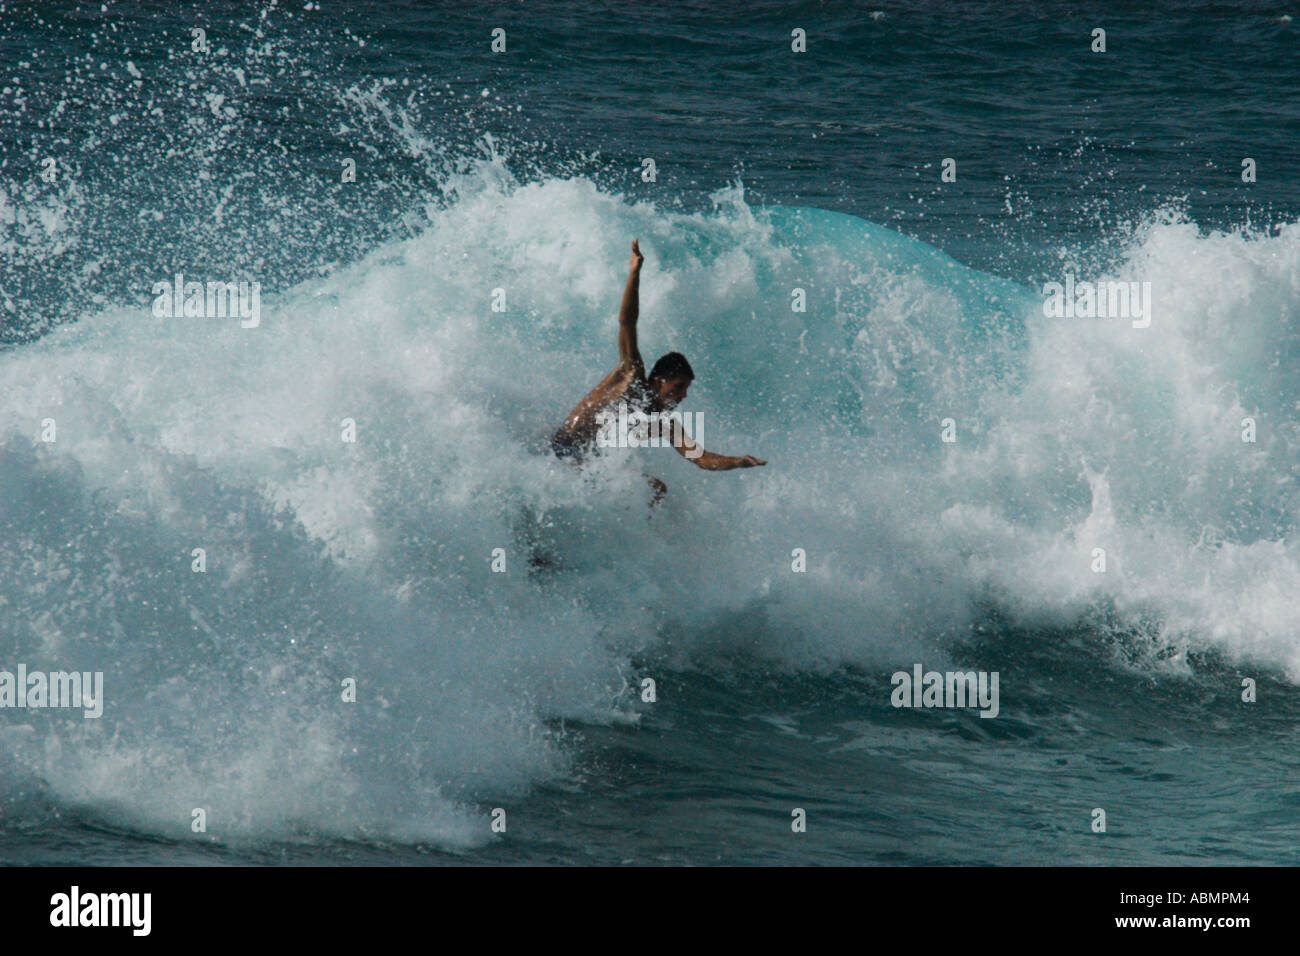 Surfer riding a wave in Pipeline beach world s surfing mecca North Shore Oahu Hawaii USA Stock Photo